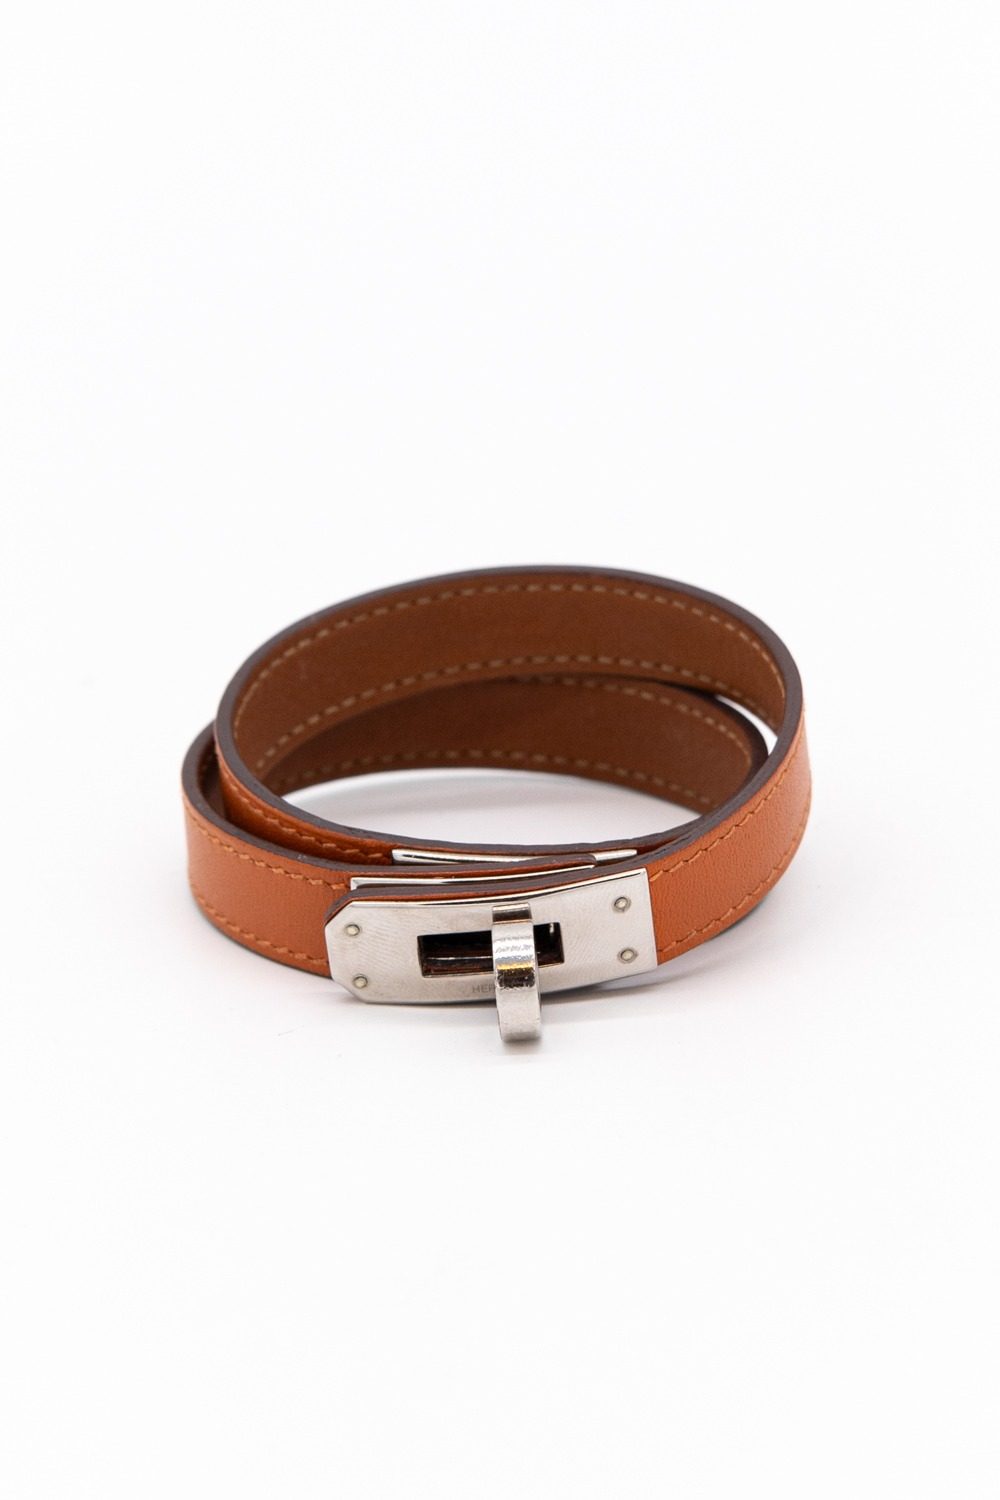 Thumbnail of http://Hermès%20Armband%20in%20Cognac%20und%20Silber